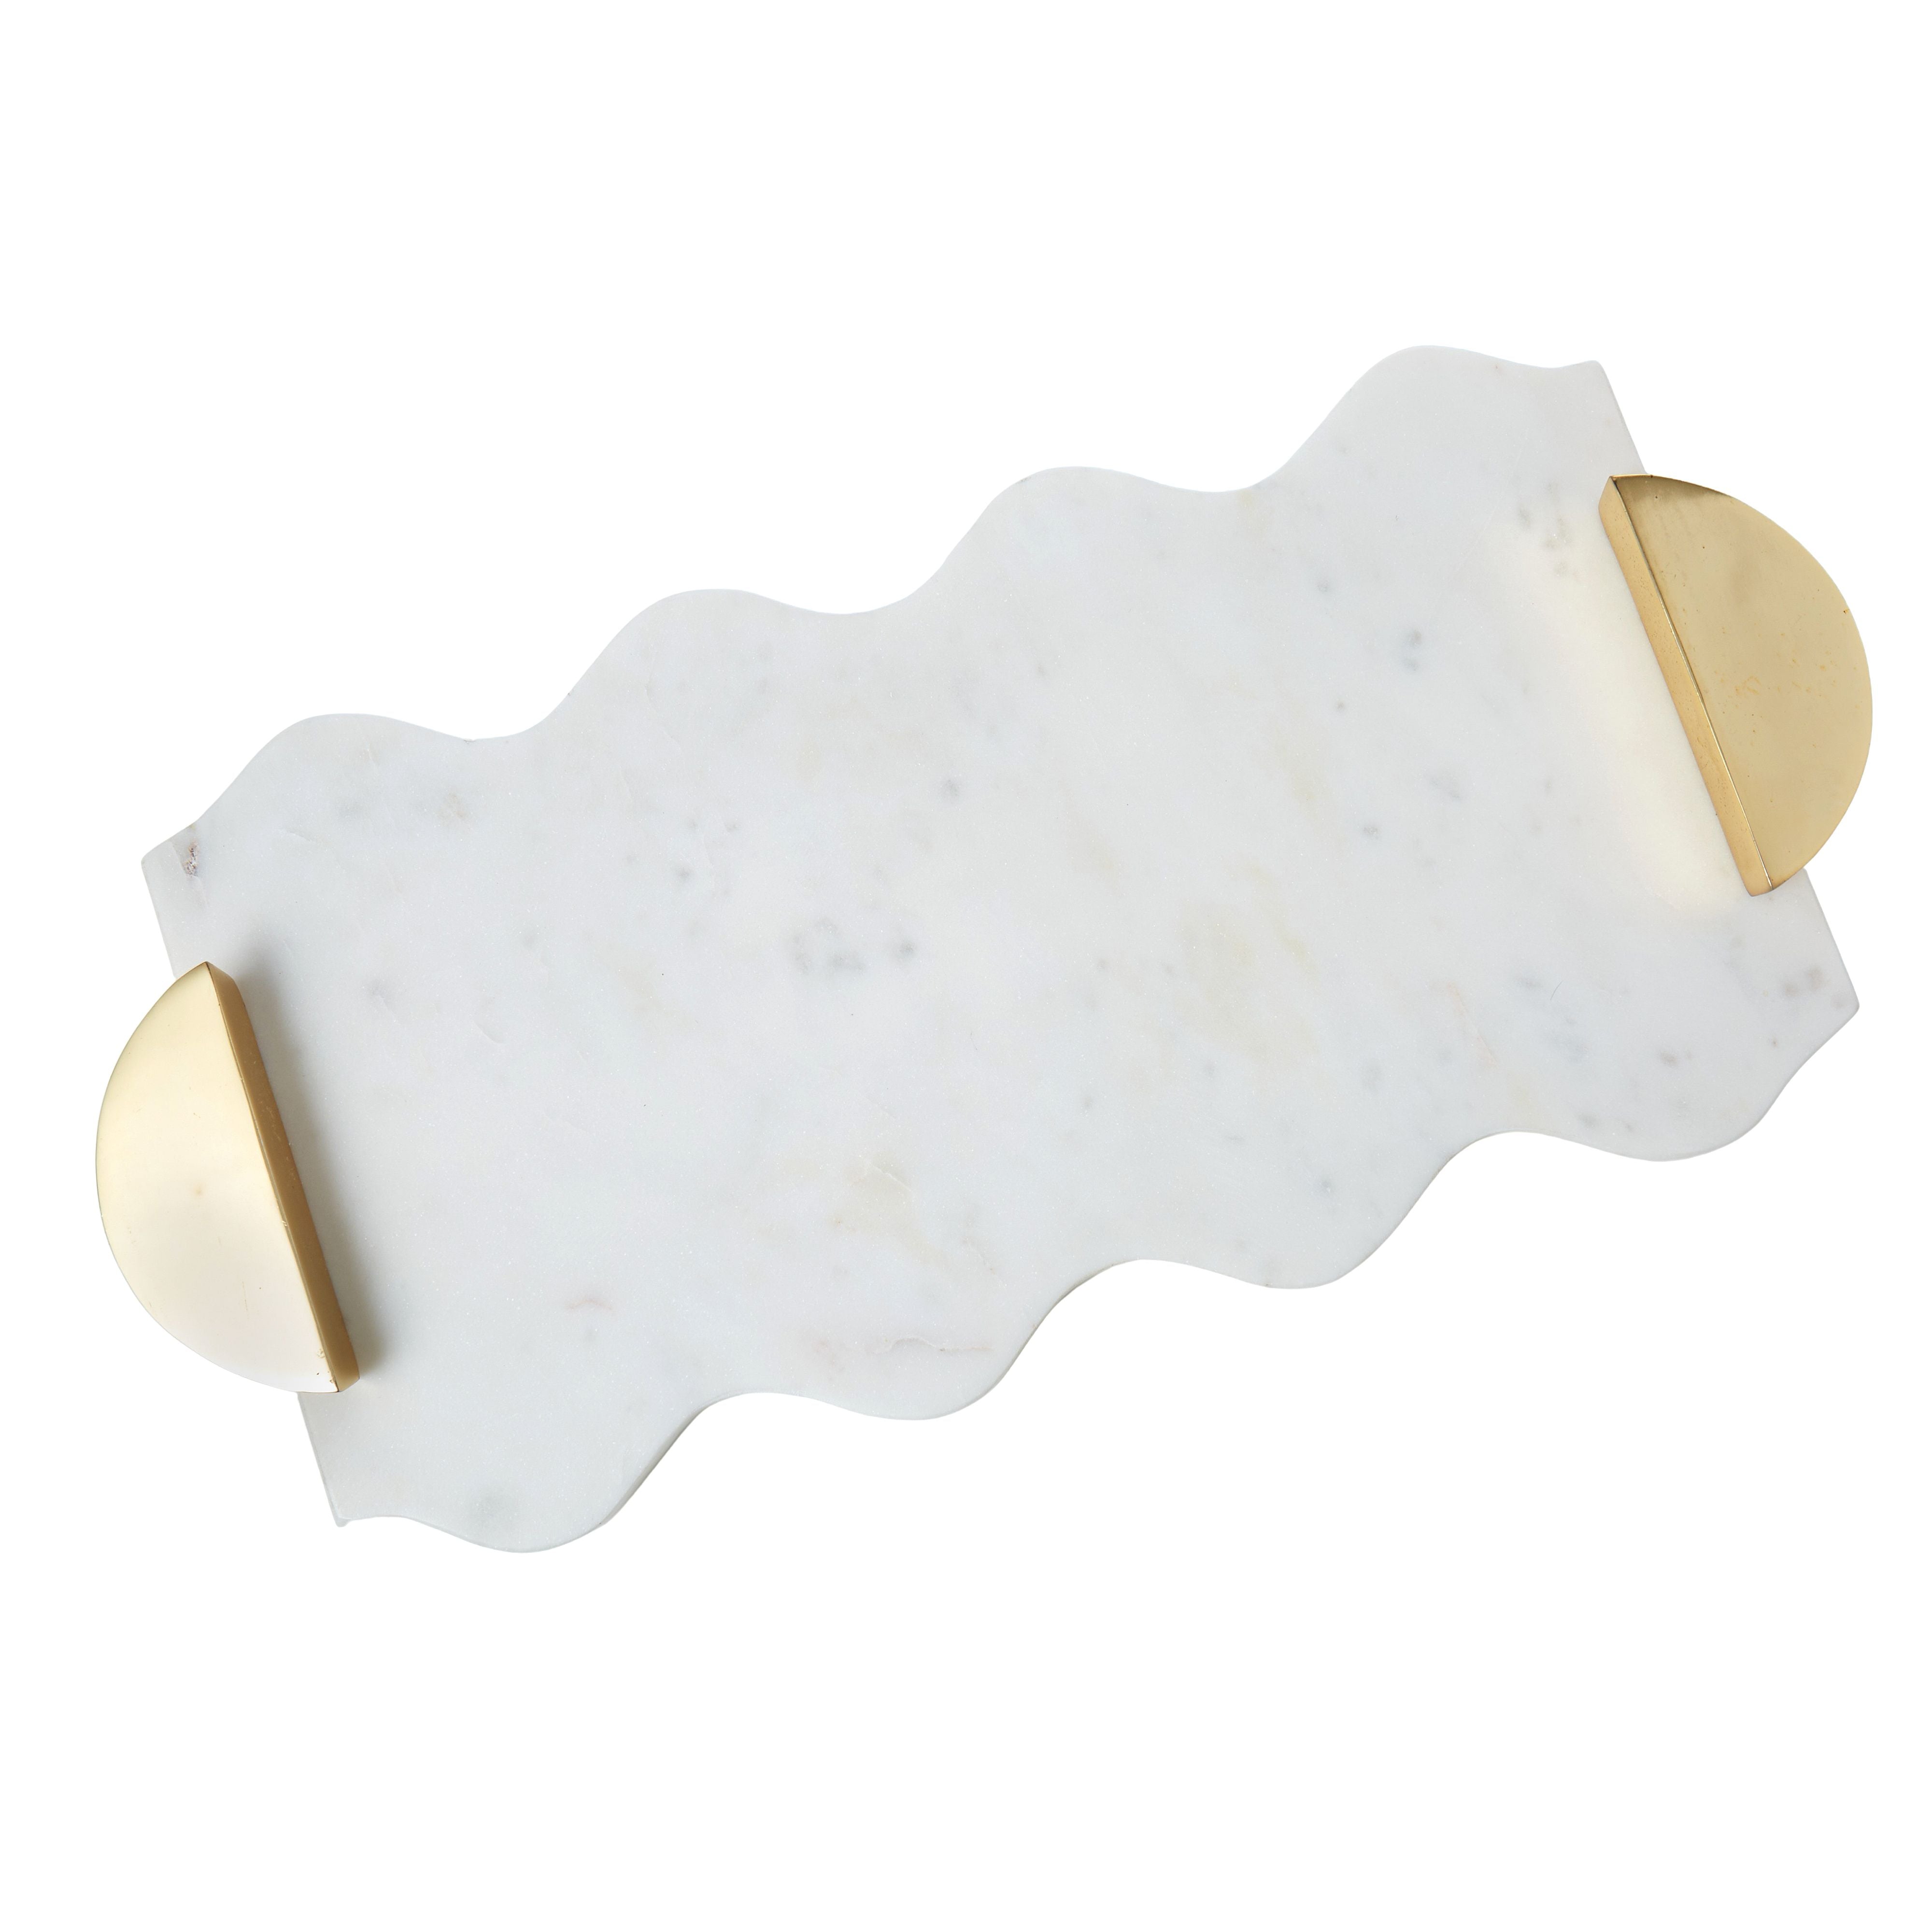 Marble Scalloped Serving Board - White/Gold-Decor Items-Amalfi-The Bay Room